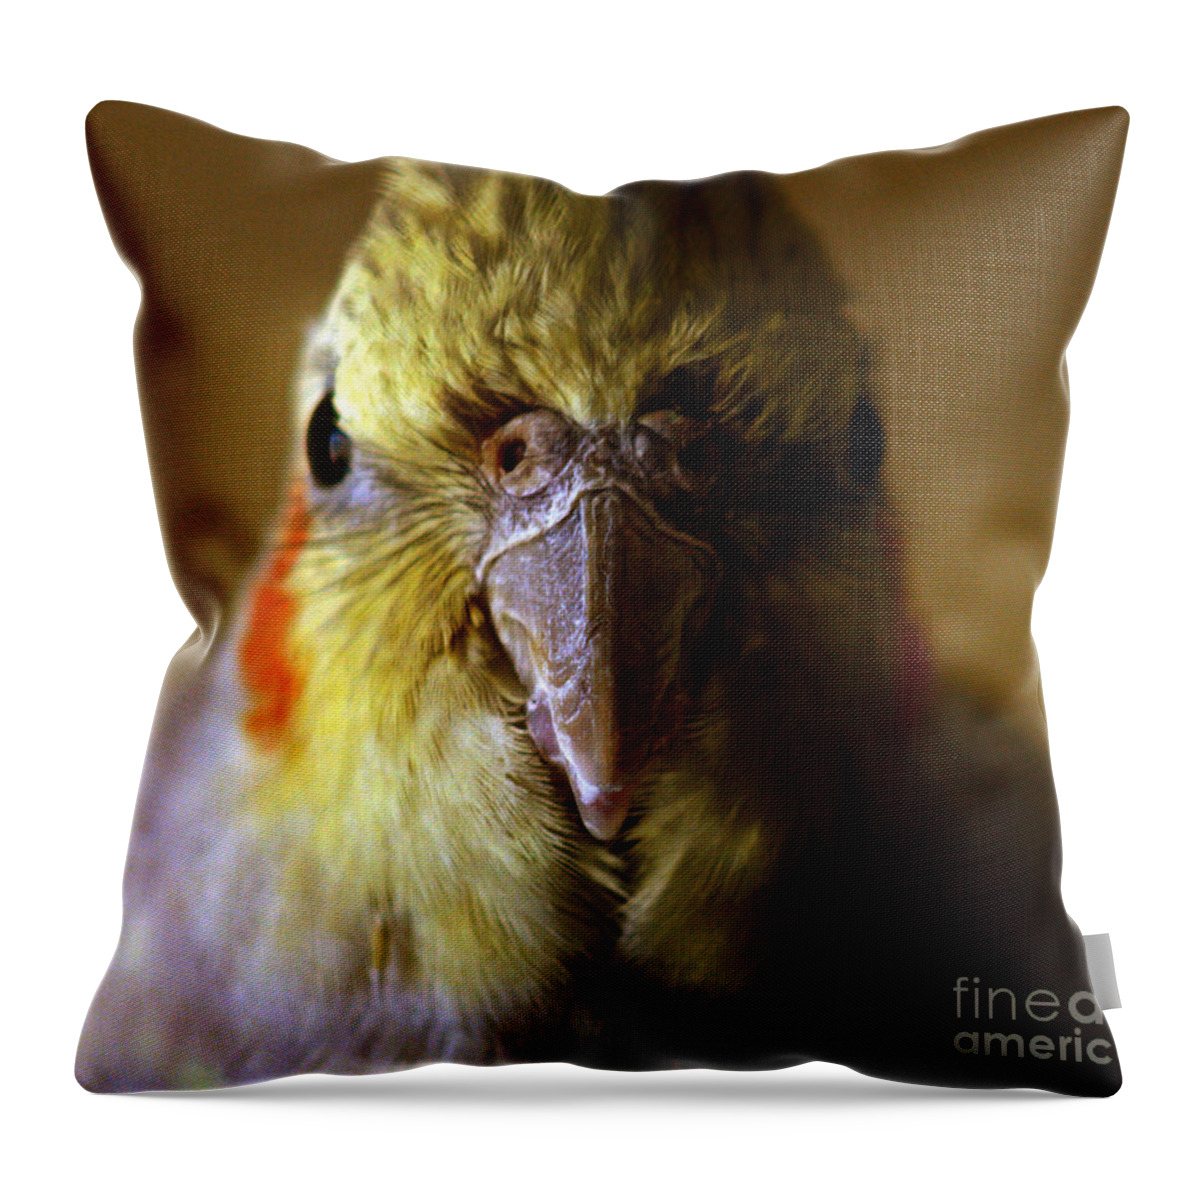 Cockatiel Throw Pillow featuring the photograph The Cockatiel by Ang El